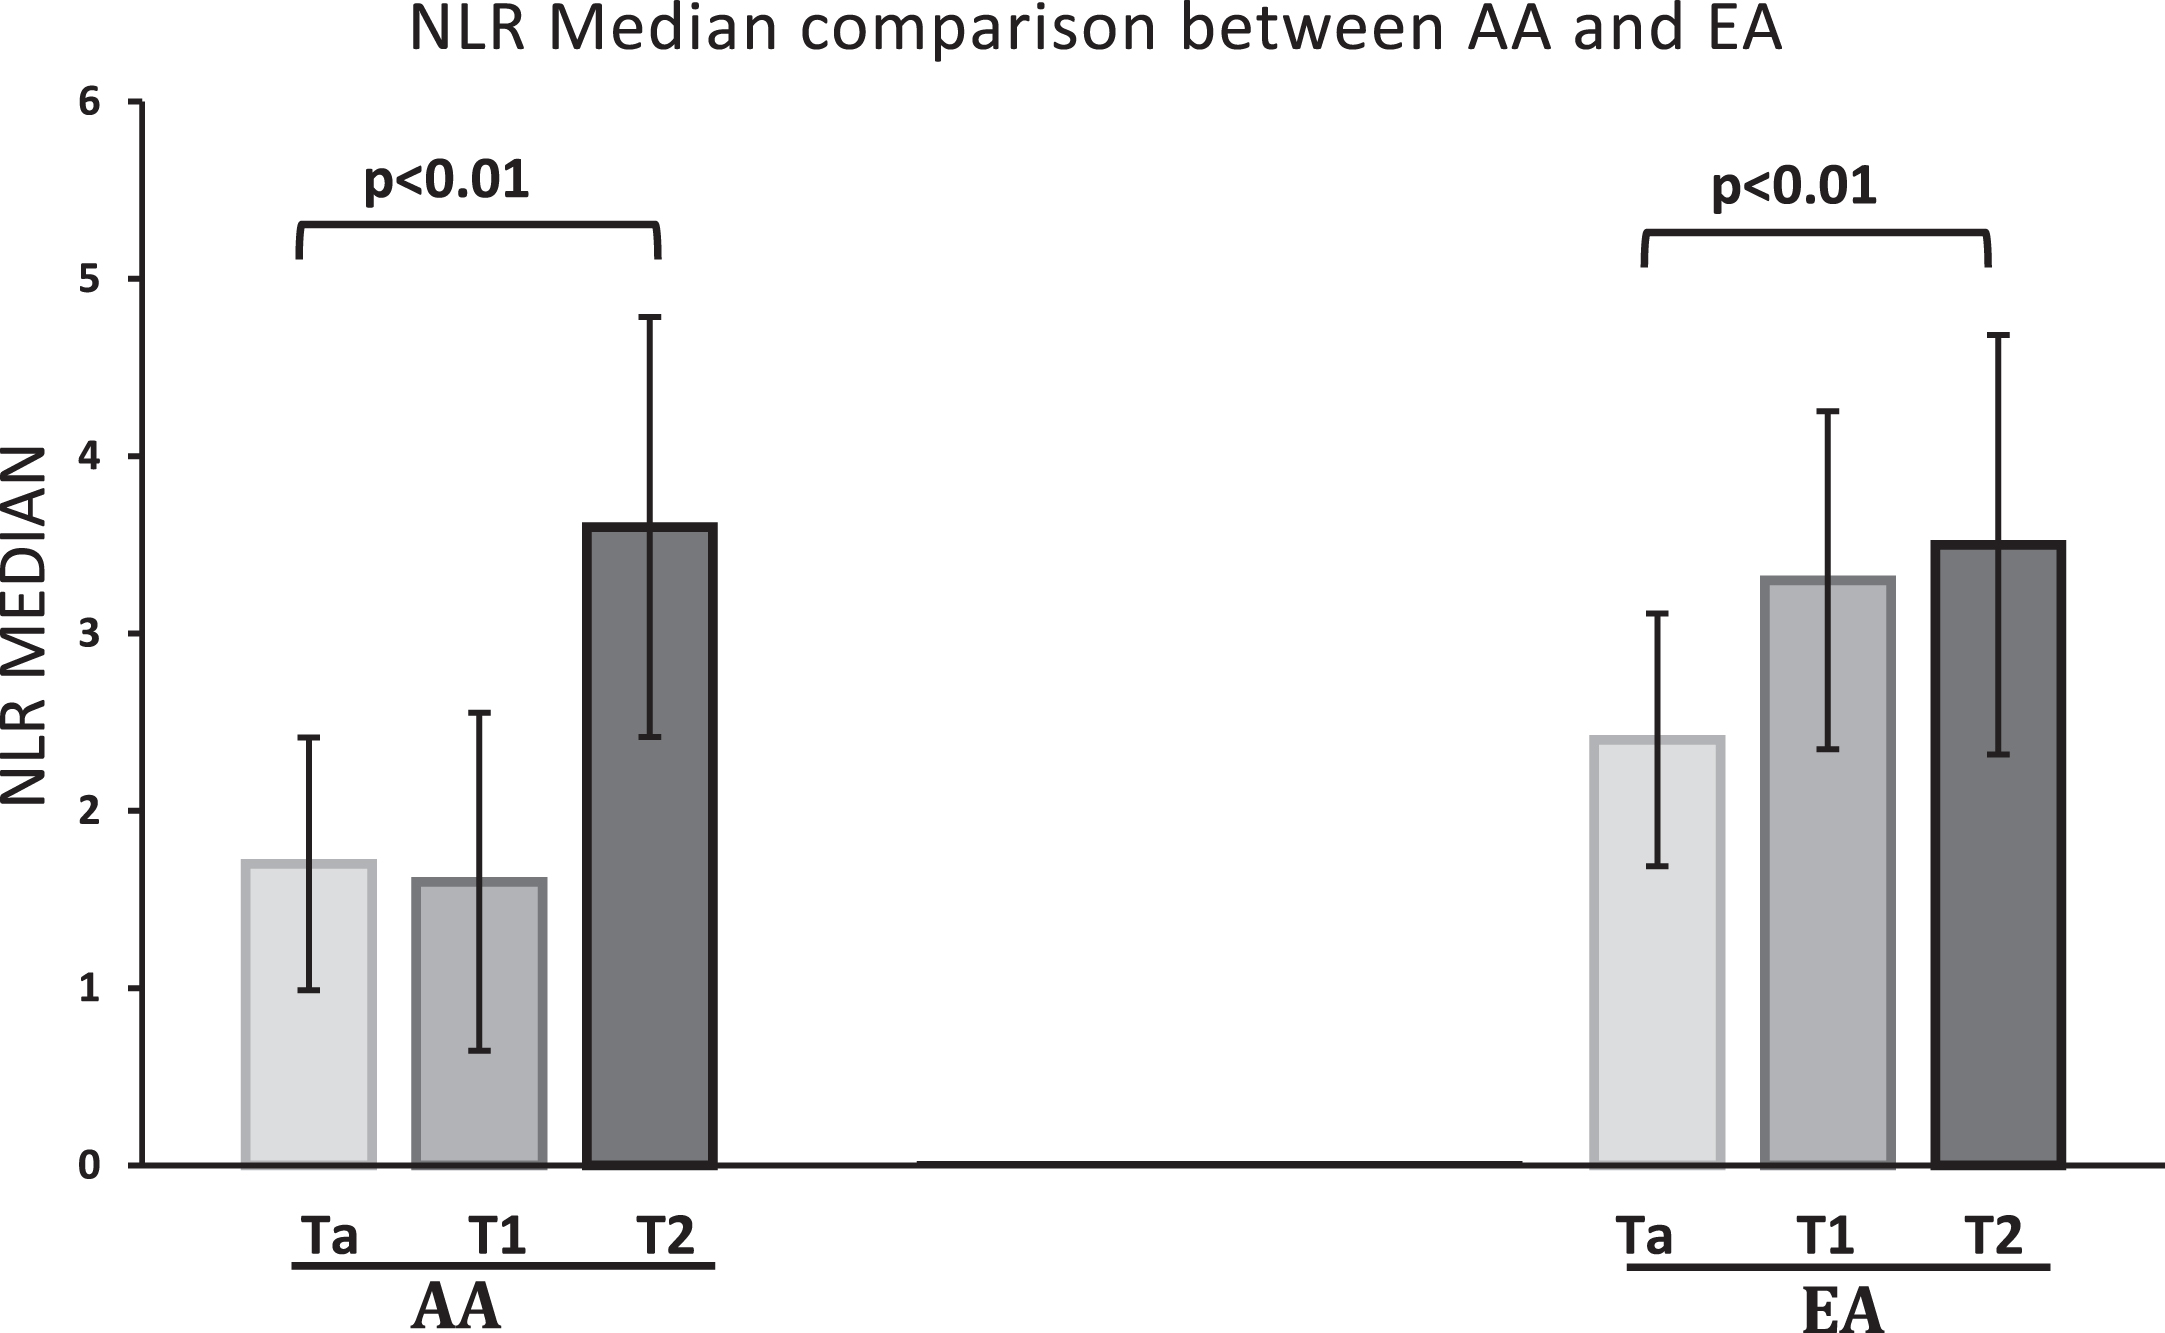 Median NLR of Ta, T1 and T2 compared between the two ethnic groups. Individual T stage mean NLR compared in AA and EA cohort. The nonparametric variables were compared using Kruskal Wallis test. There was a statistically significant difference between the NLR of Ta, T1 and T2 stage tumors, with p values of <0.01 and 0.01 in AA and EA cohorts, respectively.